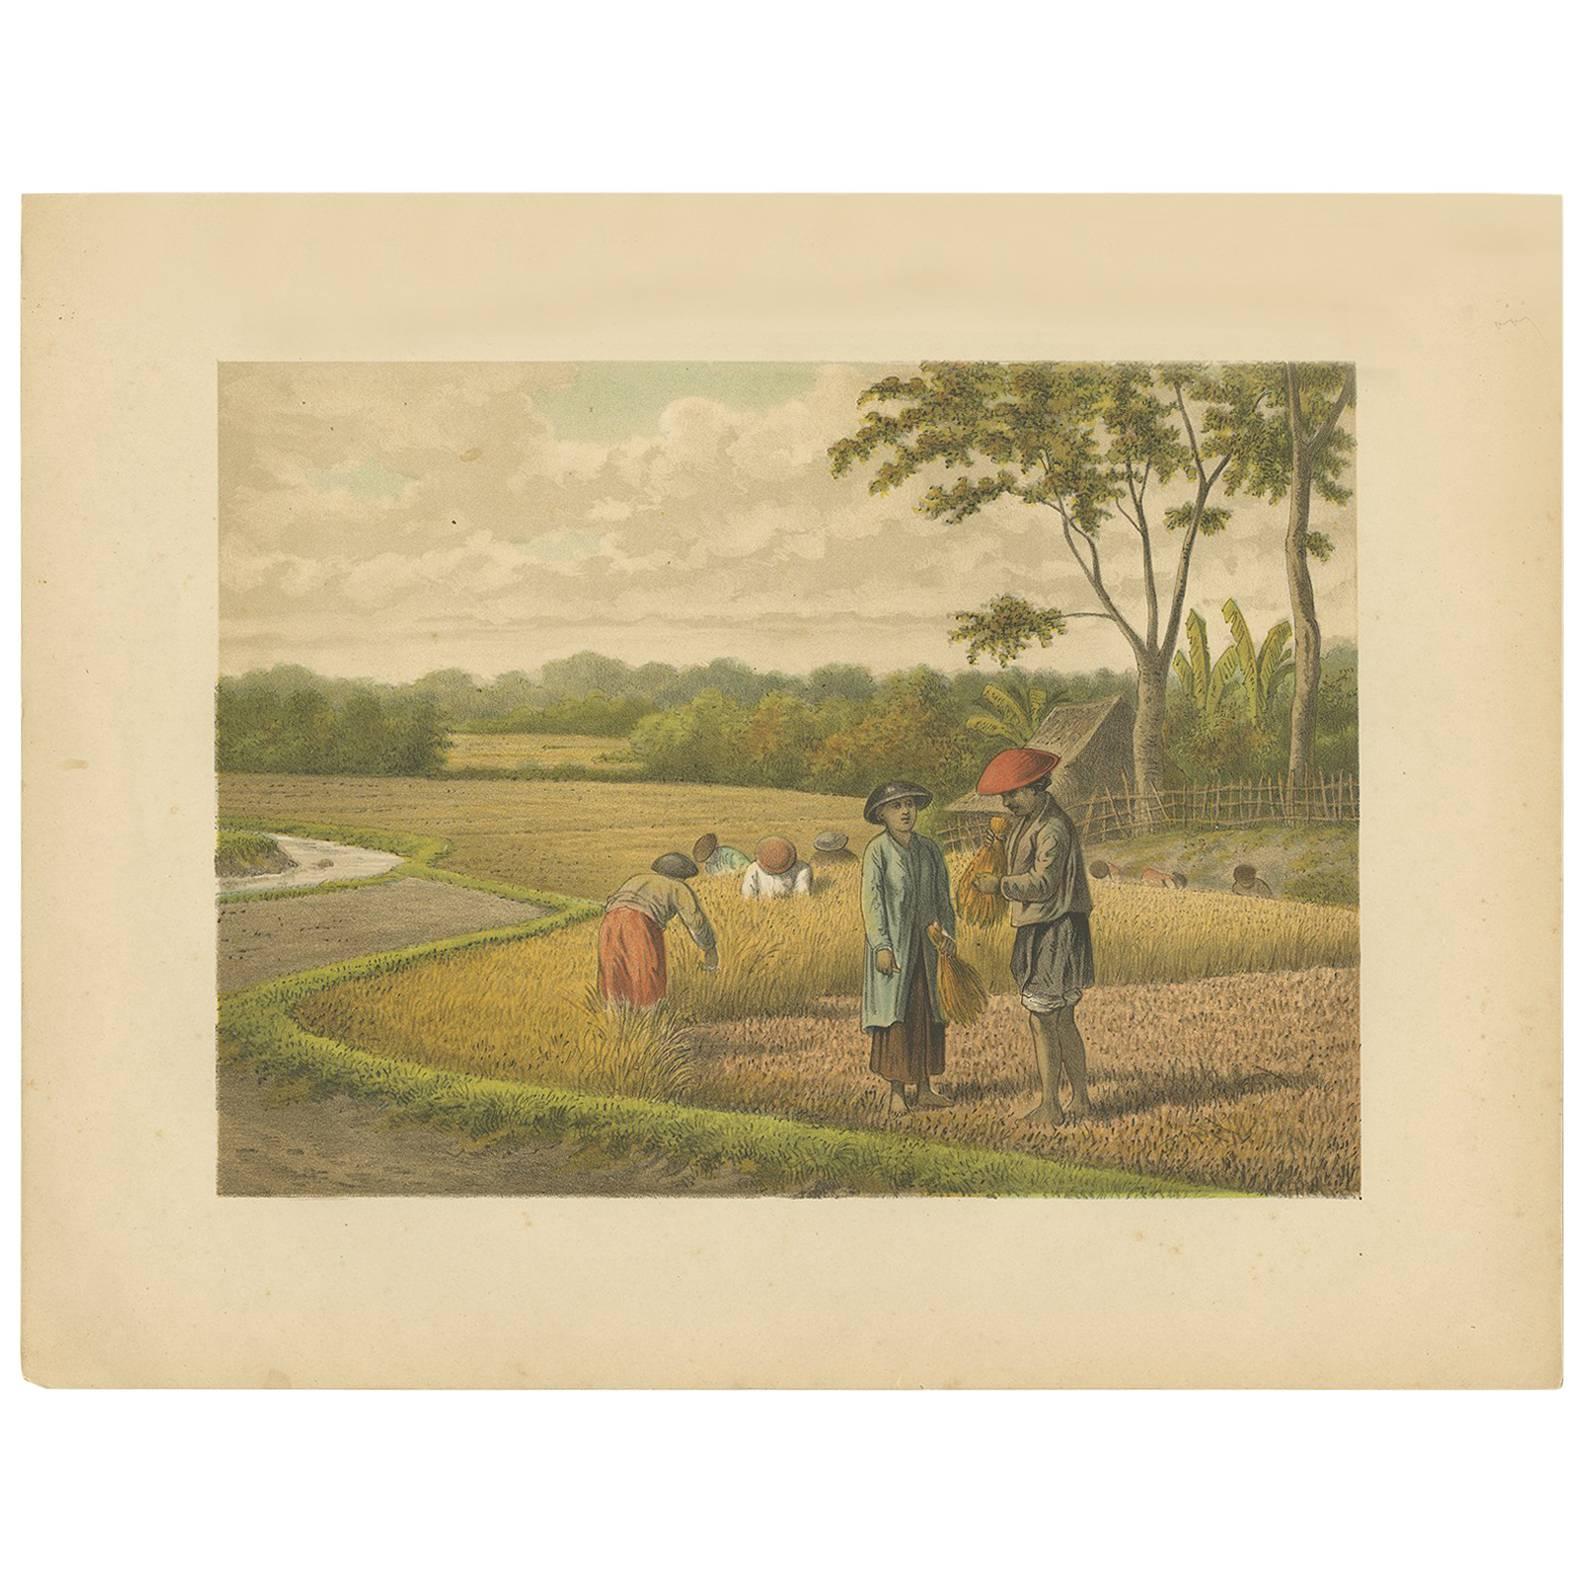 Antique Print of a Rice Field on Java by M.T.H. Perelaer, 1888